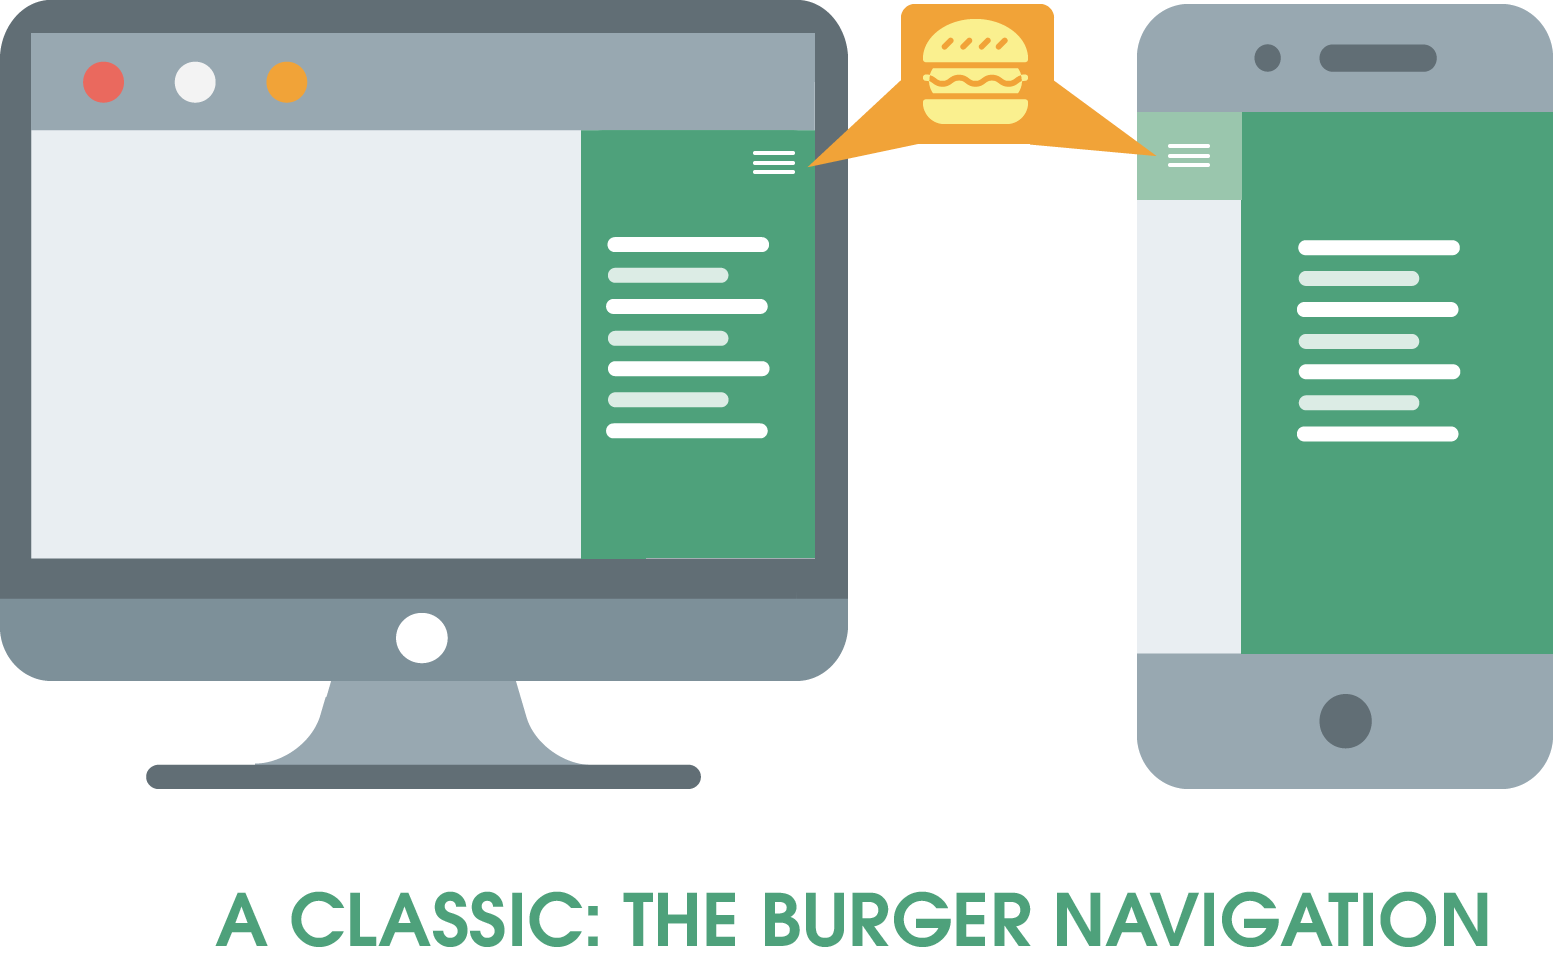 Here you will find a schematic representation of the classic burger menu. This can be recognized by the three bars stacked on top of each other. If a user clicks on this symbol, the menu opens in the form of a vertical navigation.